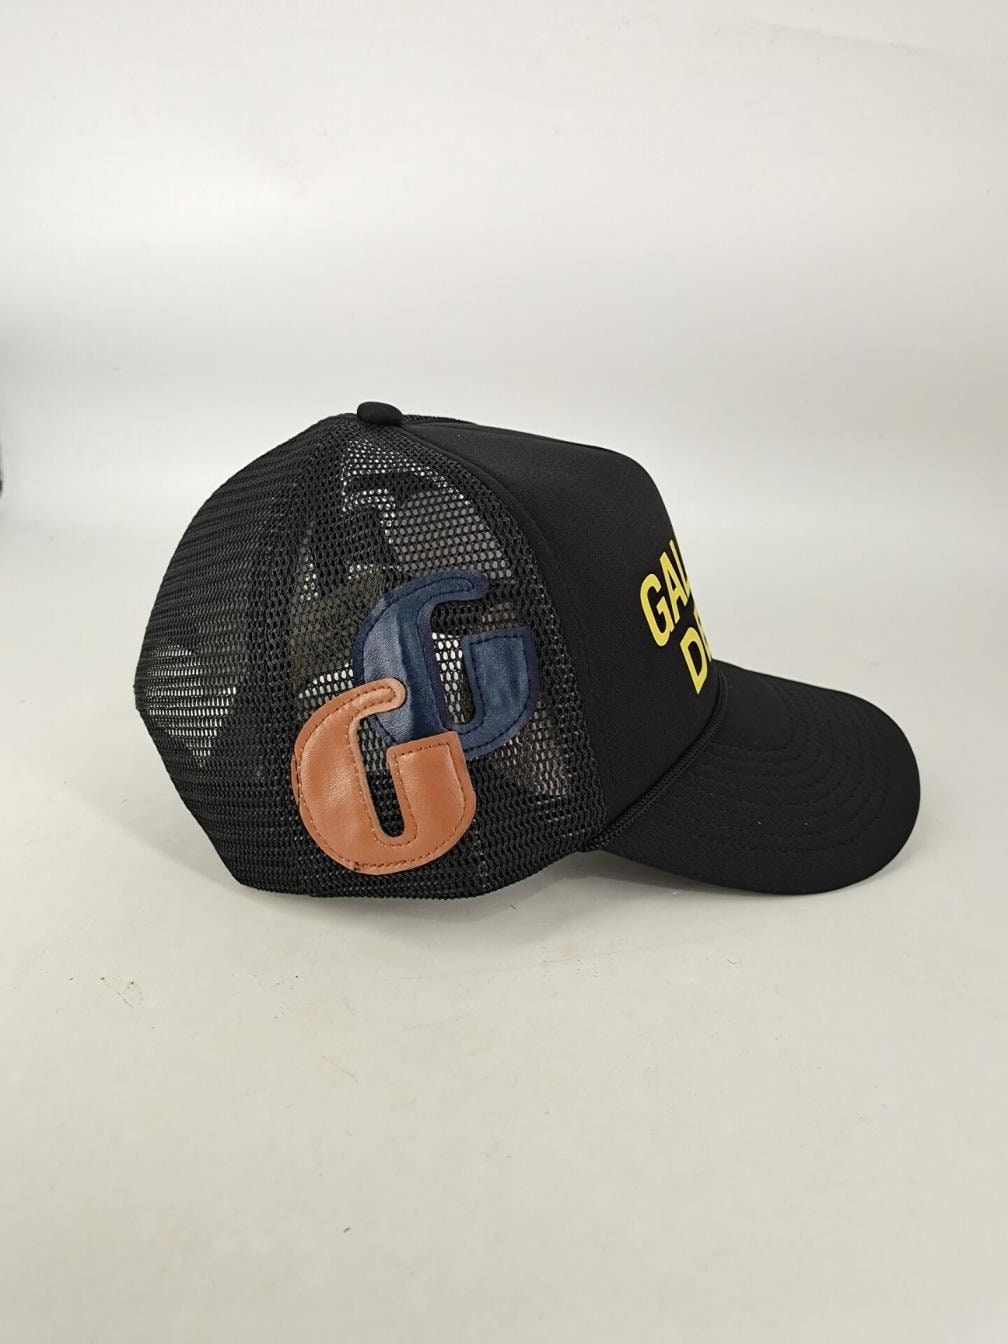 Gallery Dept. Yellow G Letter Patch Logo 5 Panel Mesh Snapback Trucker Hats  for Men Black Brand New Hypebeast Dad Hat Club - Etsy